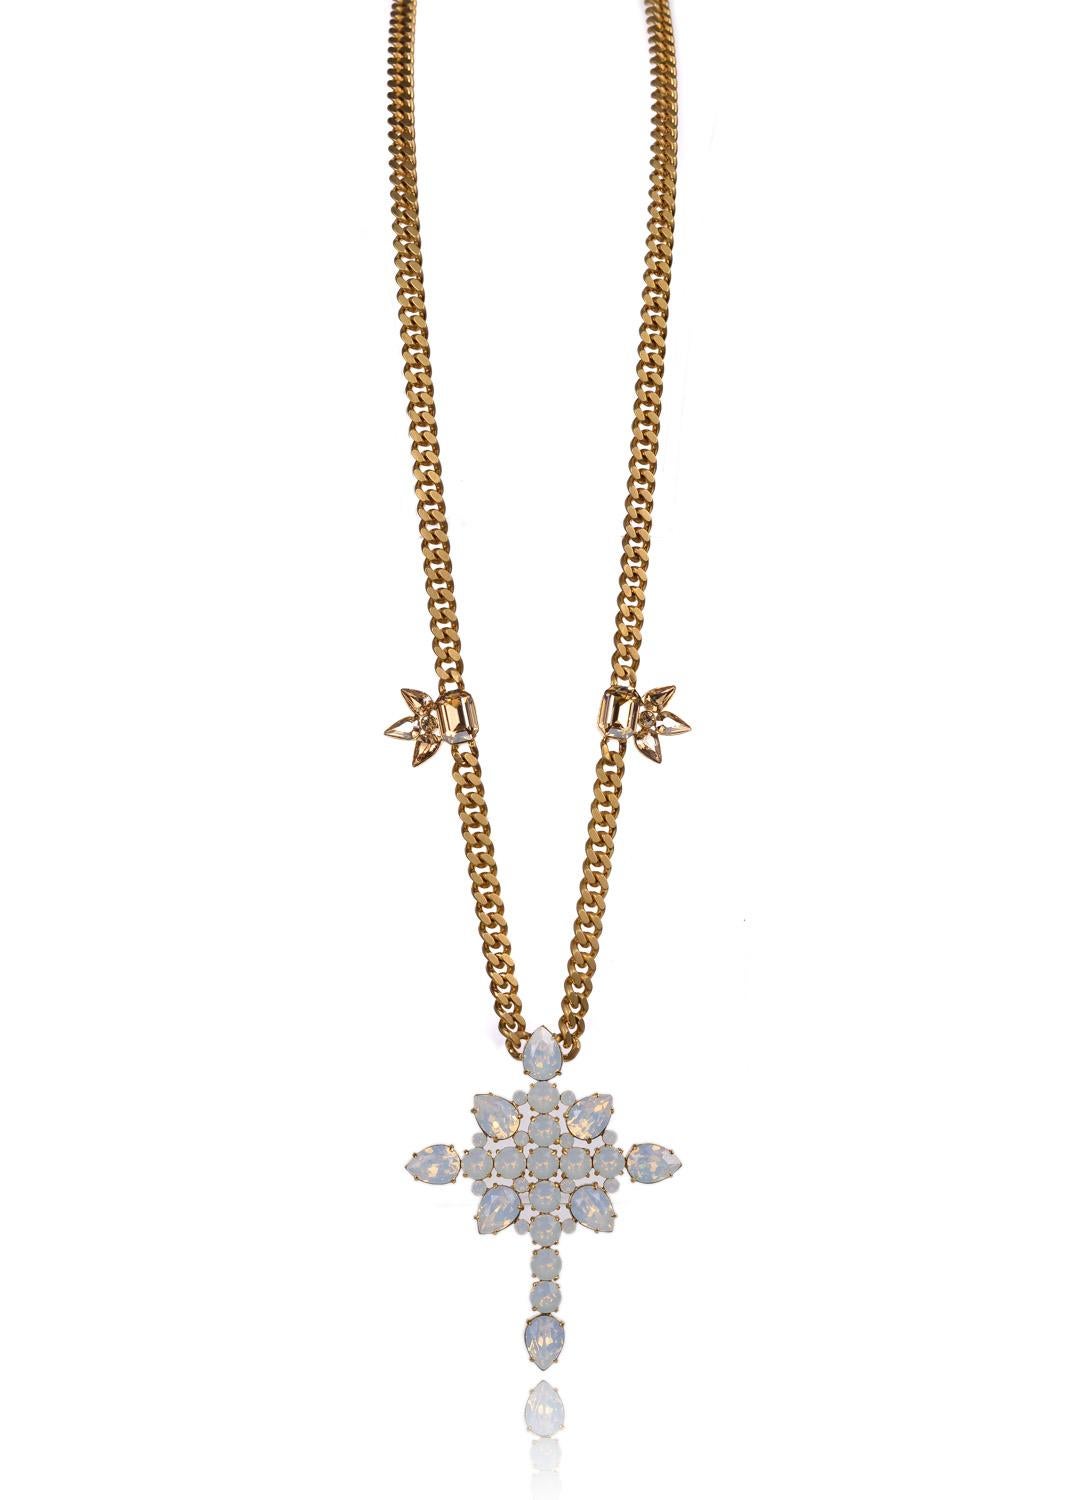 Roberto Cavalli White Opal Swarovski Cross Pendant Cuban Curb Necklace In New Condition For Sale In Brooklyn, NY